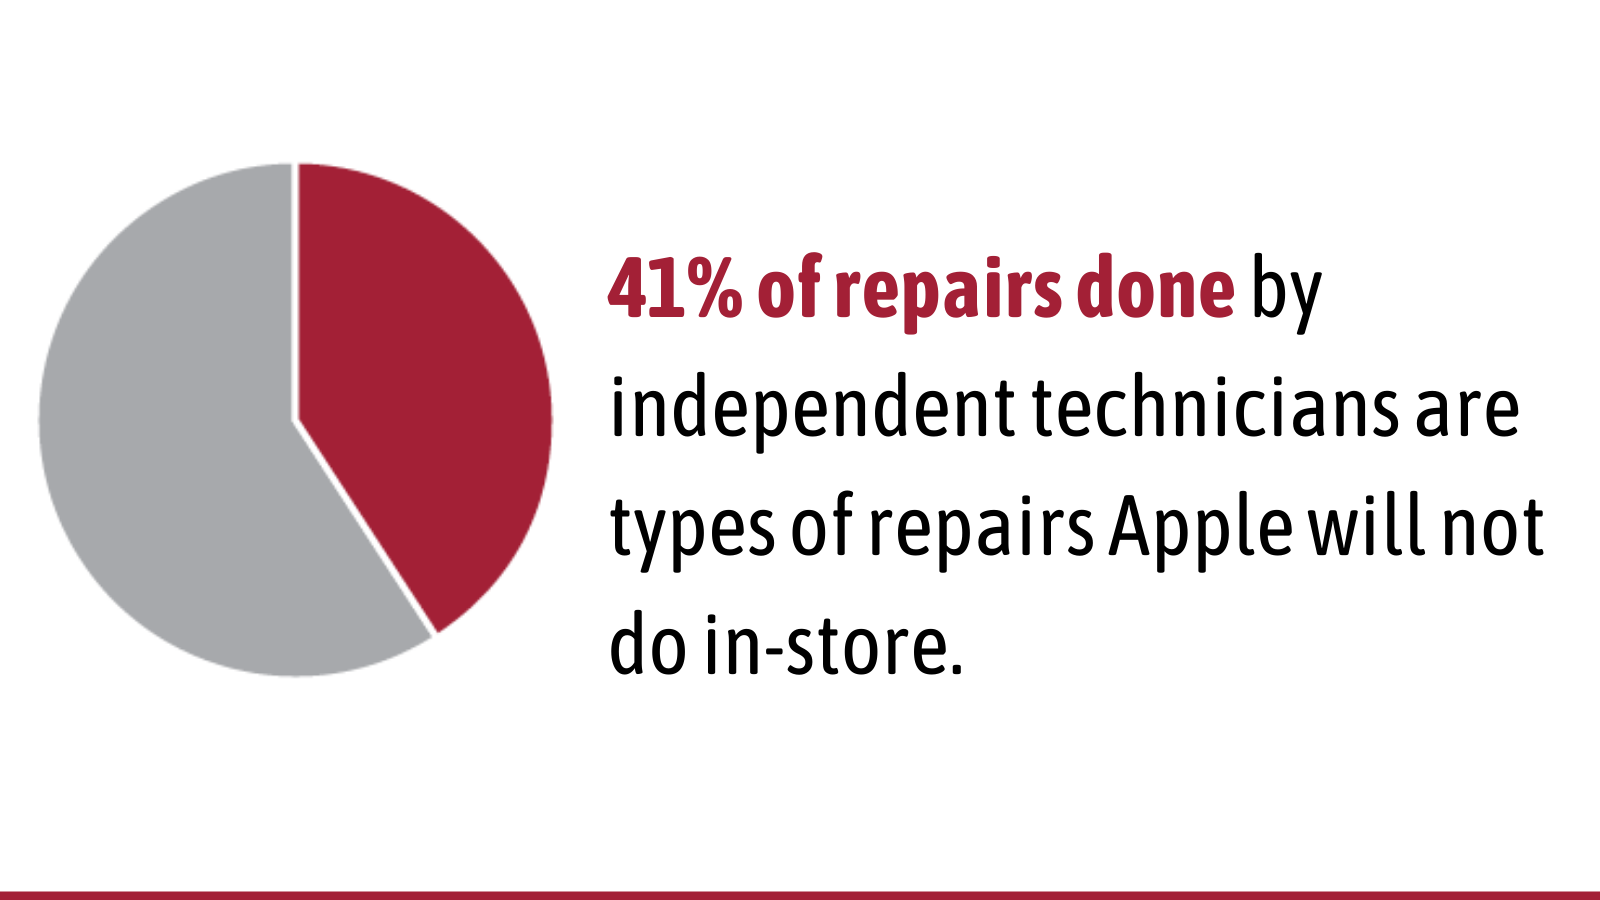 41% of repairs done by independent technicians are types of repairs Apple will not do in-store.